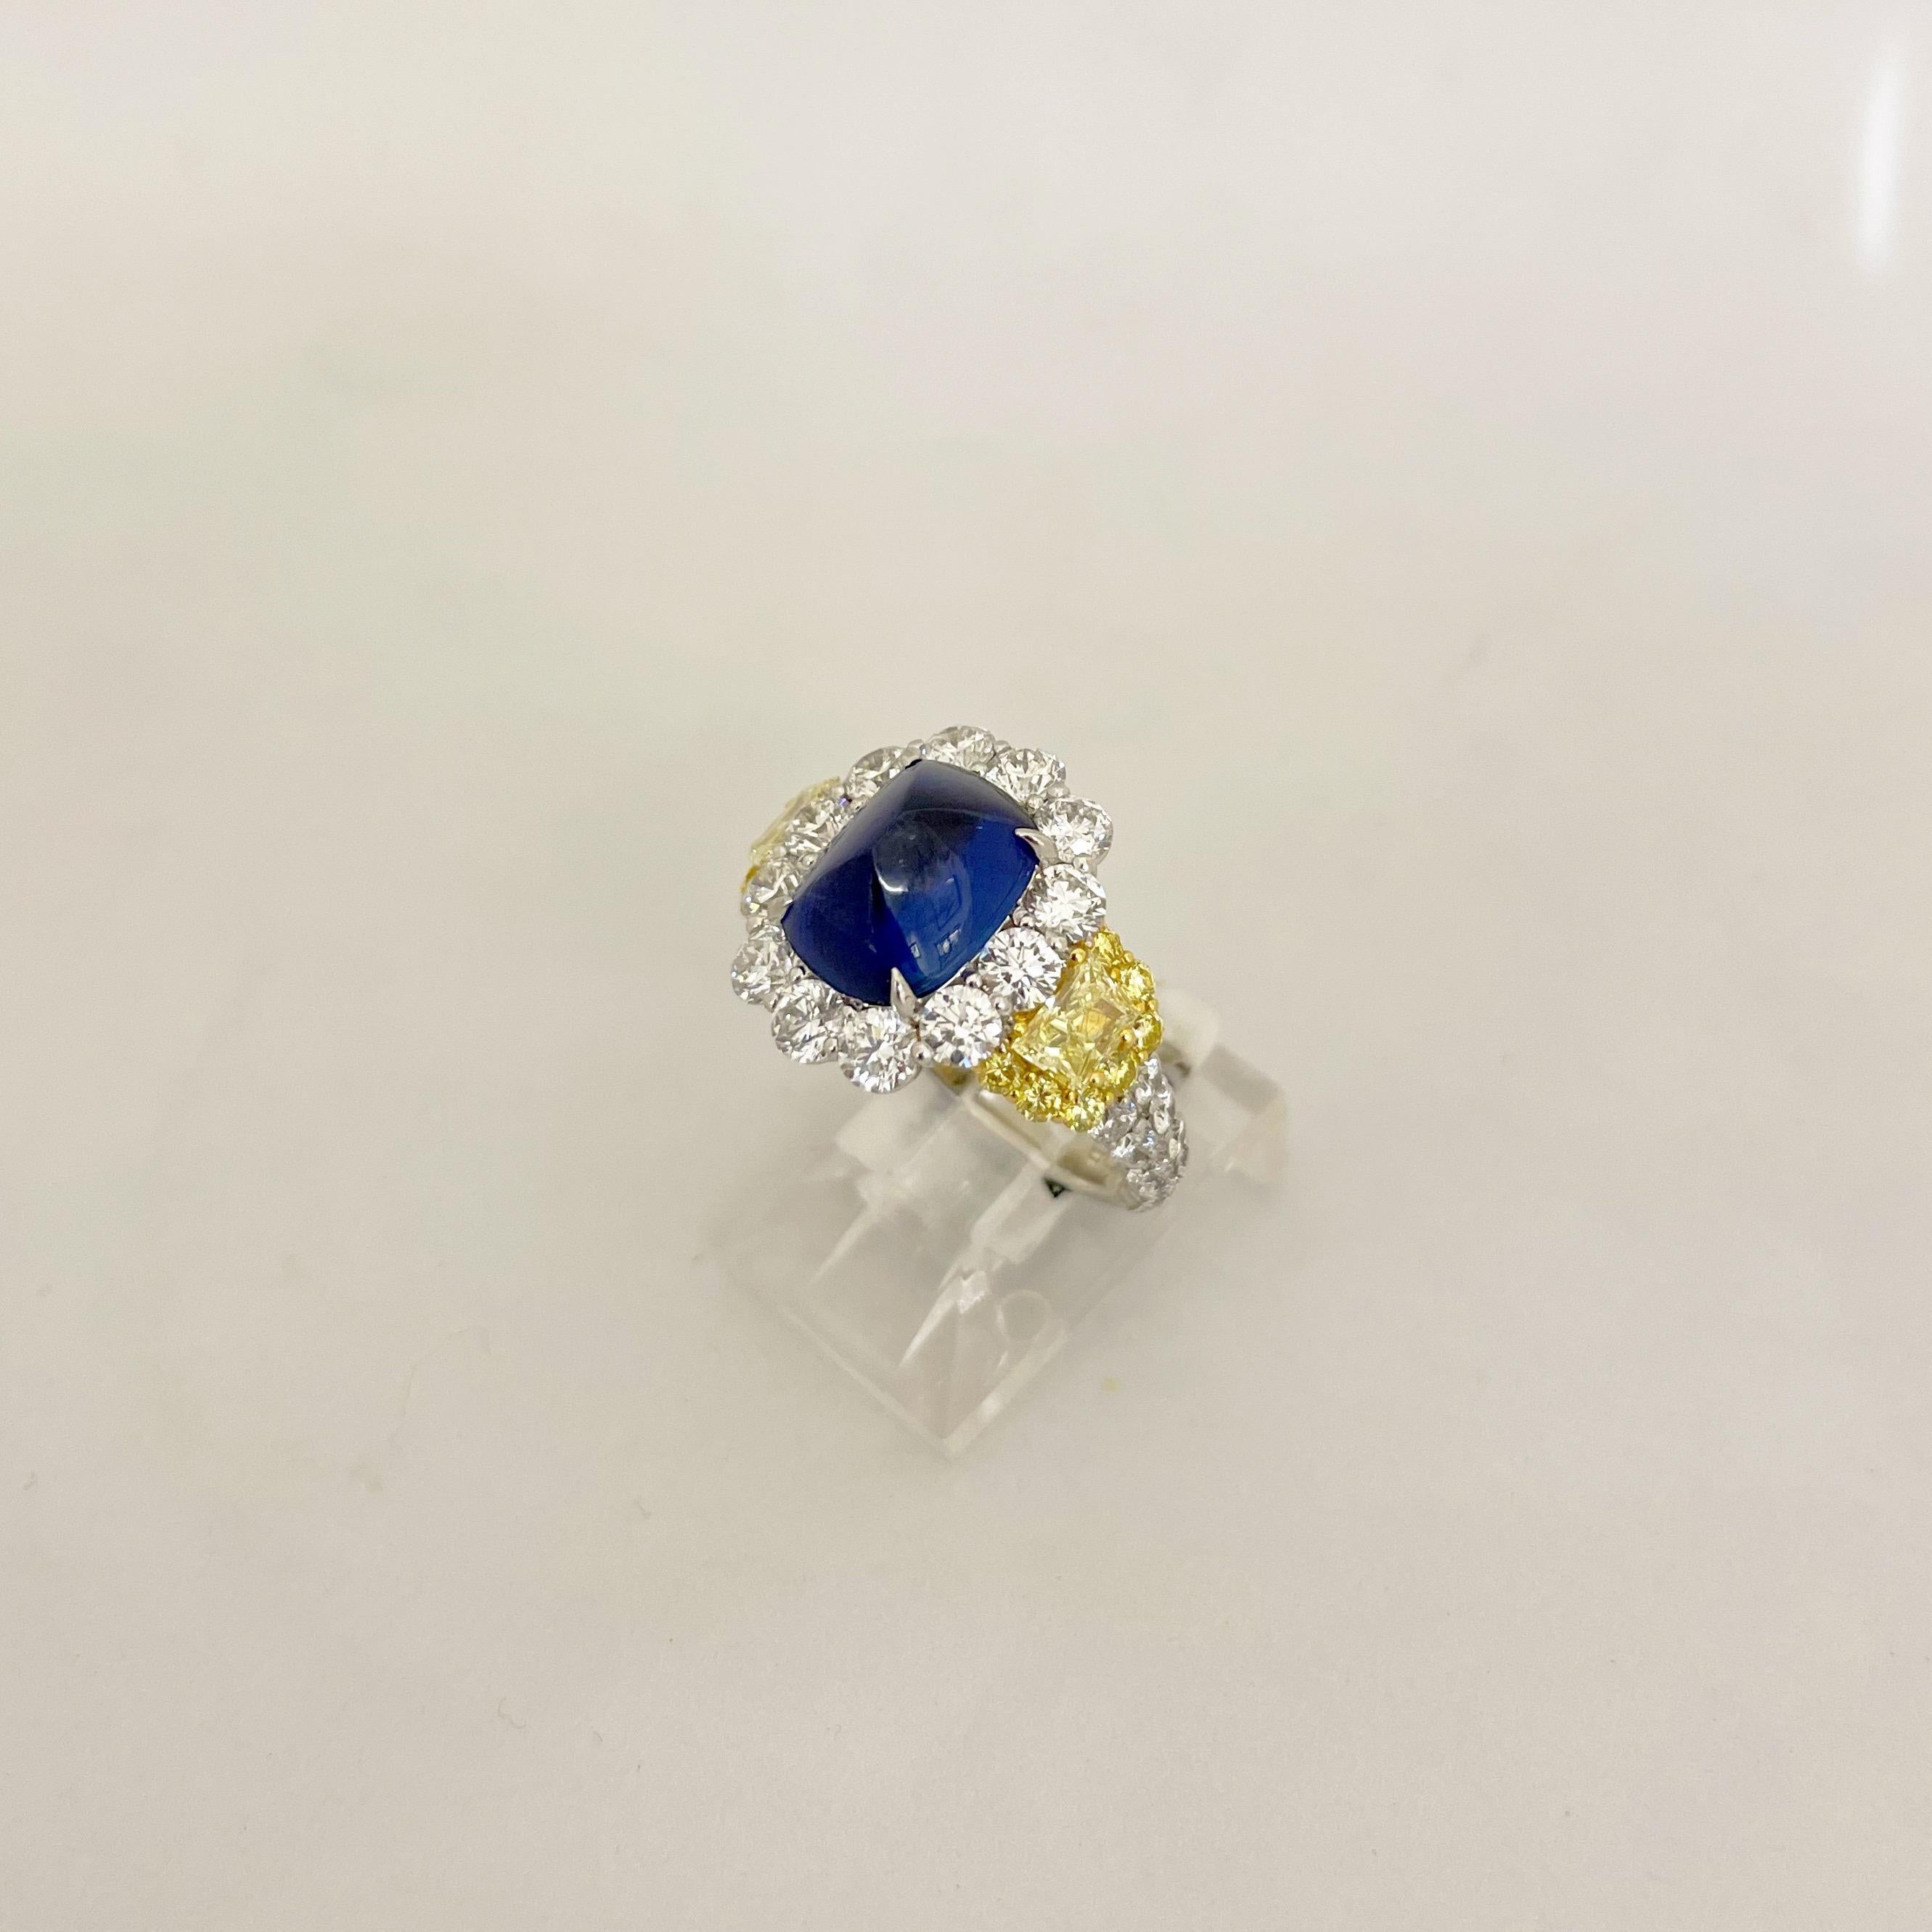 Cellini Plat/18KT 4.27Ct. Sugarloaf Sapphire, Fancy Yellow & White Diamond Ring For Sale 3